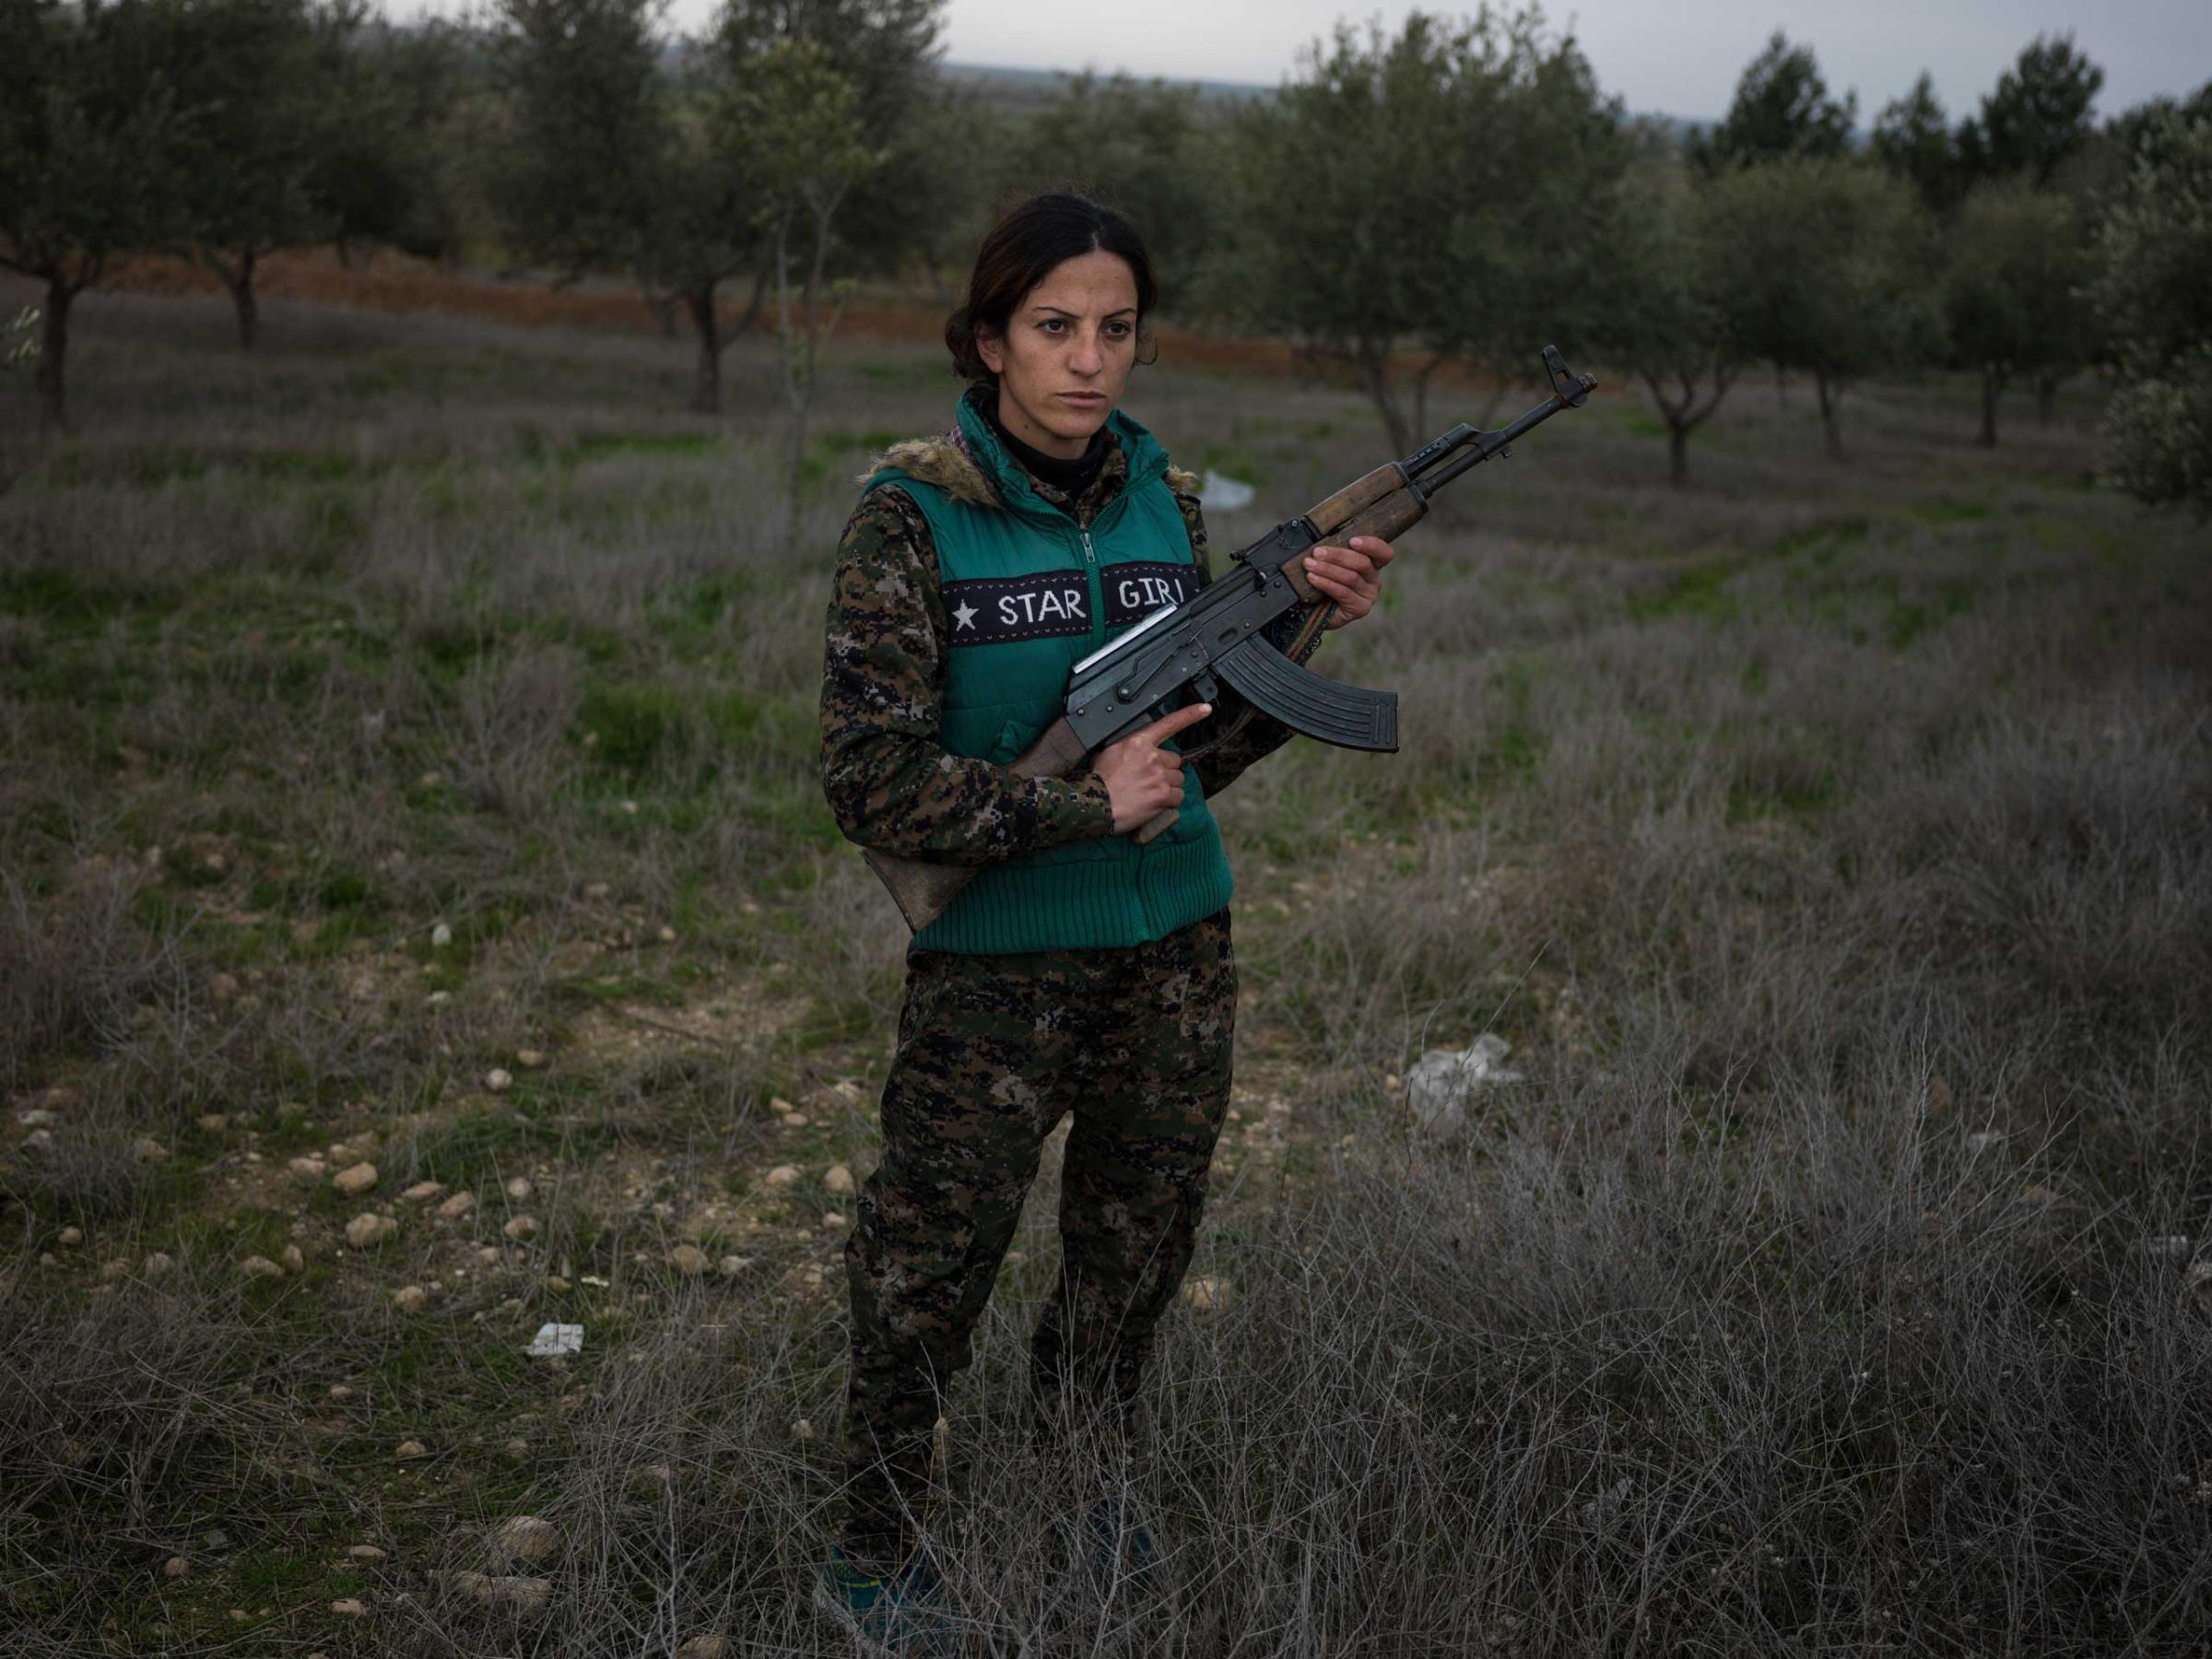 18 year-old YPJ fighter Saria Zilan from Amuda, Syria:"I fought with ISIS in Serikani. I captured one of them and wanted to kill him, but my comrades did not let me. He kept staring at the ground and would not look at me, because he said it was forbidden by his religion to look at a woman." Newsha Tavakolian for TIME "It's been one year and four months since I joined YPJ. When I saw Martyr Deli on TV after ISIS beheaded her, I went to her burial ceremony the next day in Amuda. I saw Deli's mother sobbing madly. Right there I swore to myself to avenge her death. I joined YPJ the day after. In the past, women had various roles in the society. but all those roles were taken from them. We are here now to take back the role of women in society. I grew up in a country, where I was not allowed to speak my mother tongue of Kurdish. I was not allowed to have a Kurdish name. If you were a pro-Kurdish activist, they'd arrest you and put you in jail. But since the Rojava revolution, we have been getting back our rights. We were not allowed to speak our language before, and now ISIS wants to wipe us off completely from the Earth. I fought with ISIS in Serikani. I captured one of them and wanted to kill him, but my comrades did not let me do so. He kept staring at the ground and would not look at me, because he said it was forbidden by his religion to look at a woman. I have changed a lot. My way of thinking about the world has changed since I joined YPJ. Maybe some people wonder why we're doing this. But when they get to know us better, they will understand why. We are emotional people."